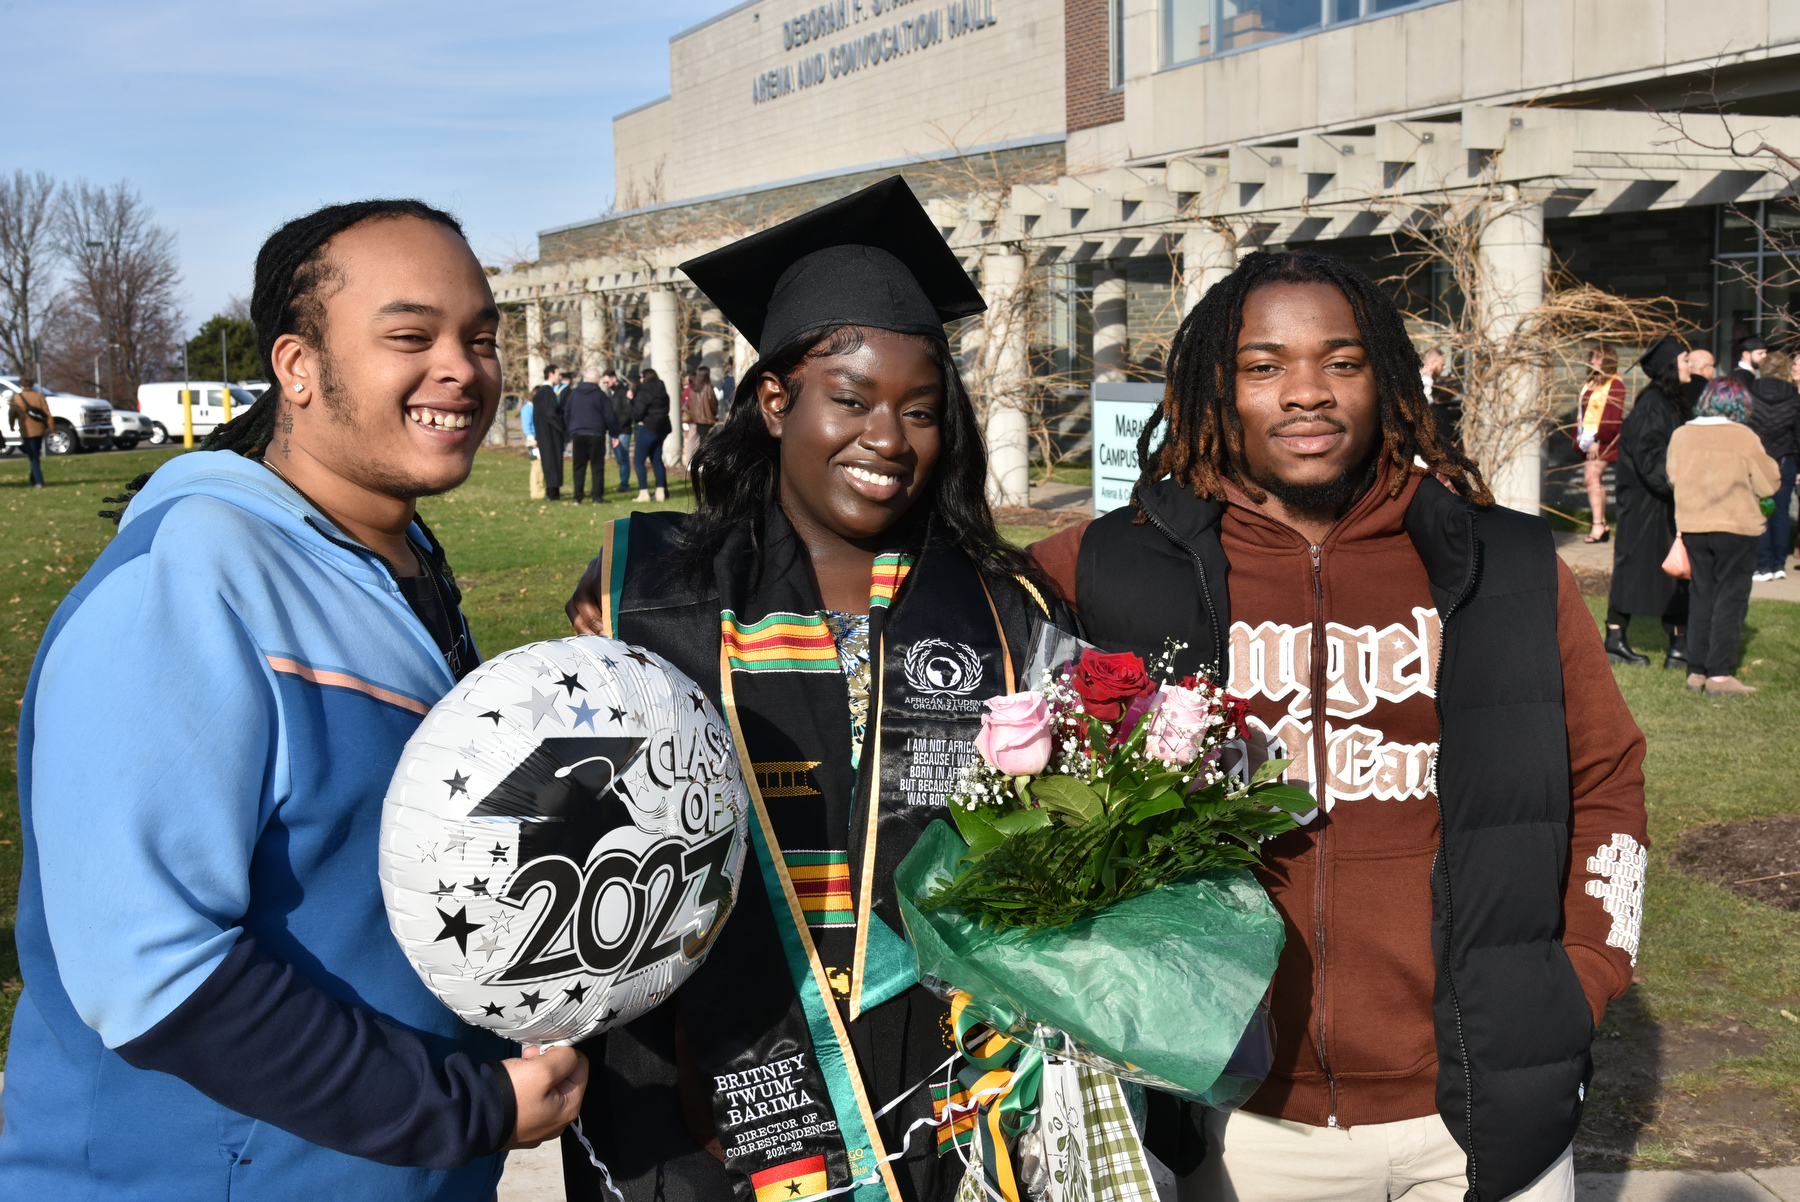 Britney Twum-Barim, a School of Education graduate, celebrates with supporters after the December Commencement ceremony held in the Deborah F. Stanley Arena and Convocation Hall in Marano Campus Center.